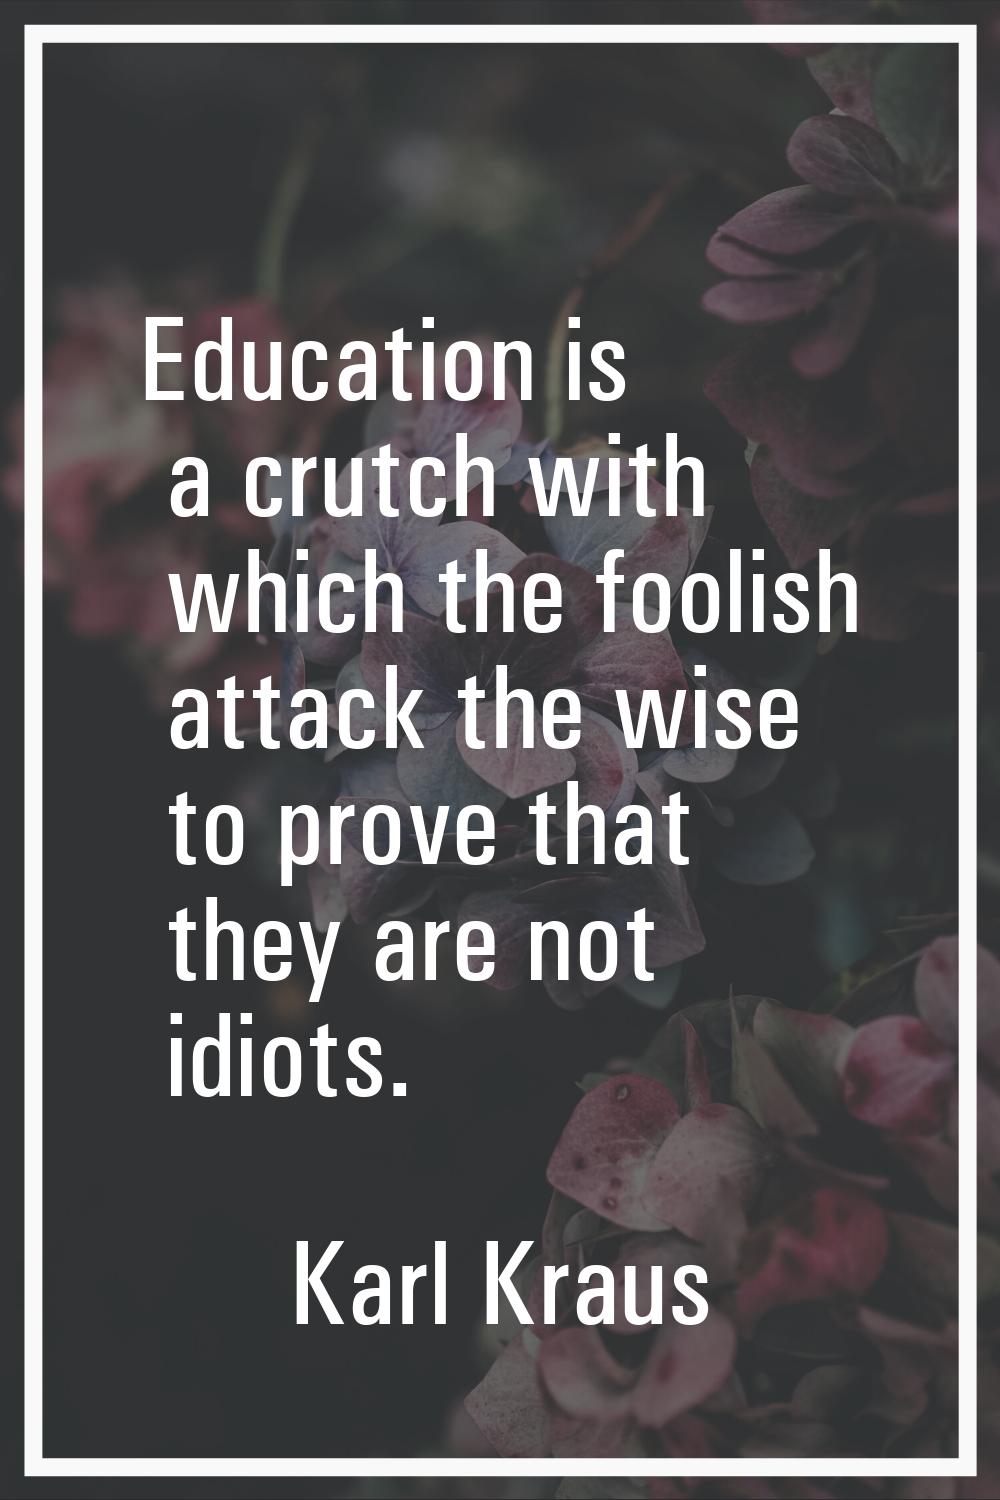 Education is a crutch with which the foolish attack the wise to prove that they are not idiots.